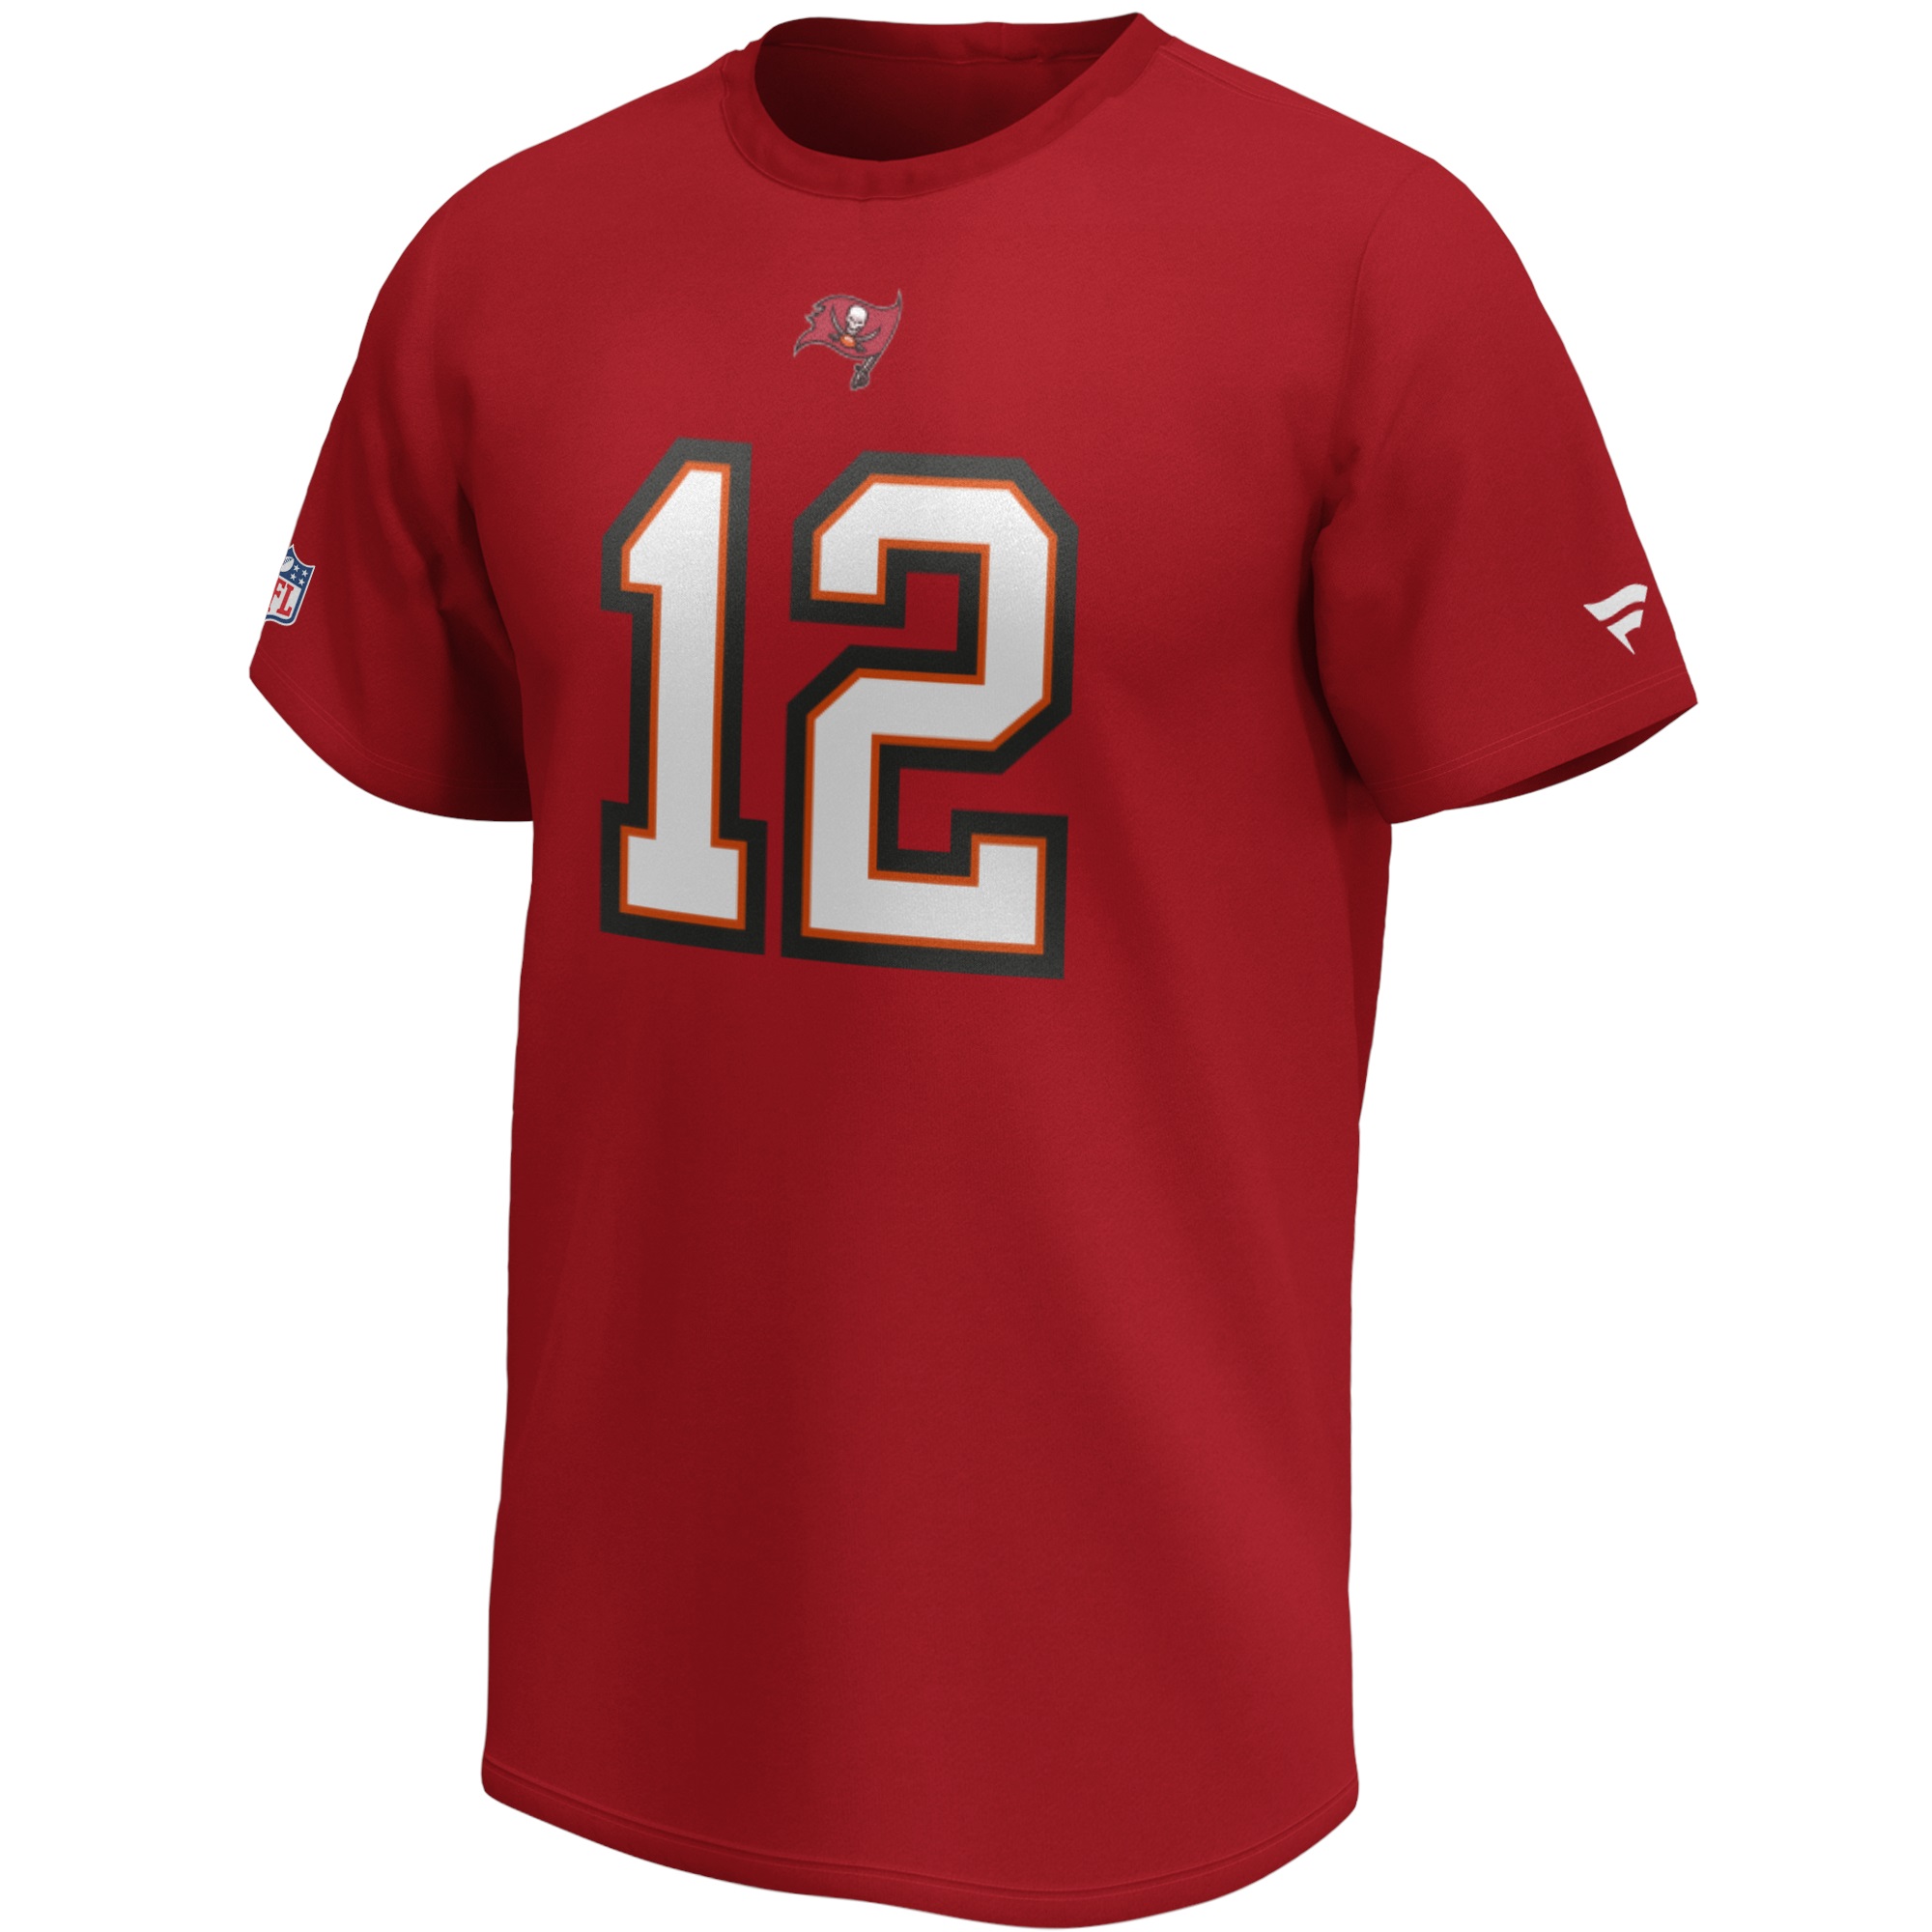 Tom Brady #12 Tampa Bay Buccaneers Iconic Name and Number Graphic T-Shirt Fanatics